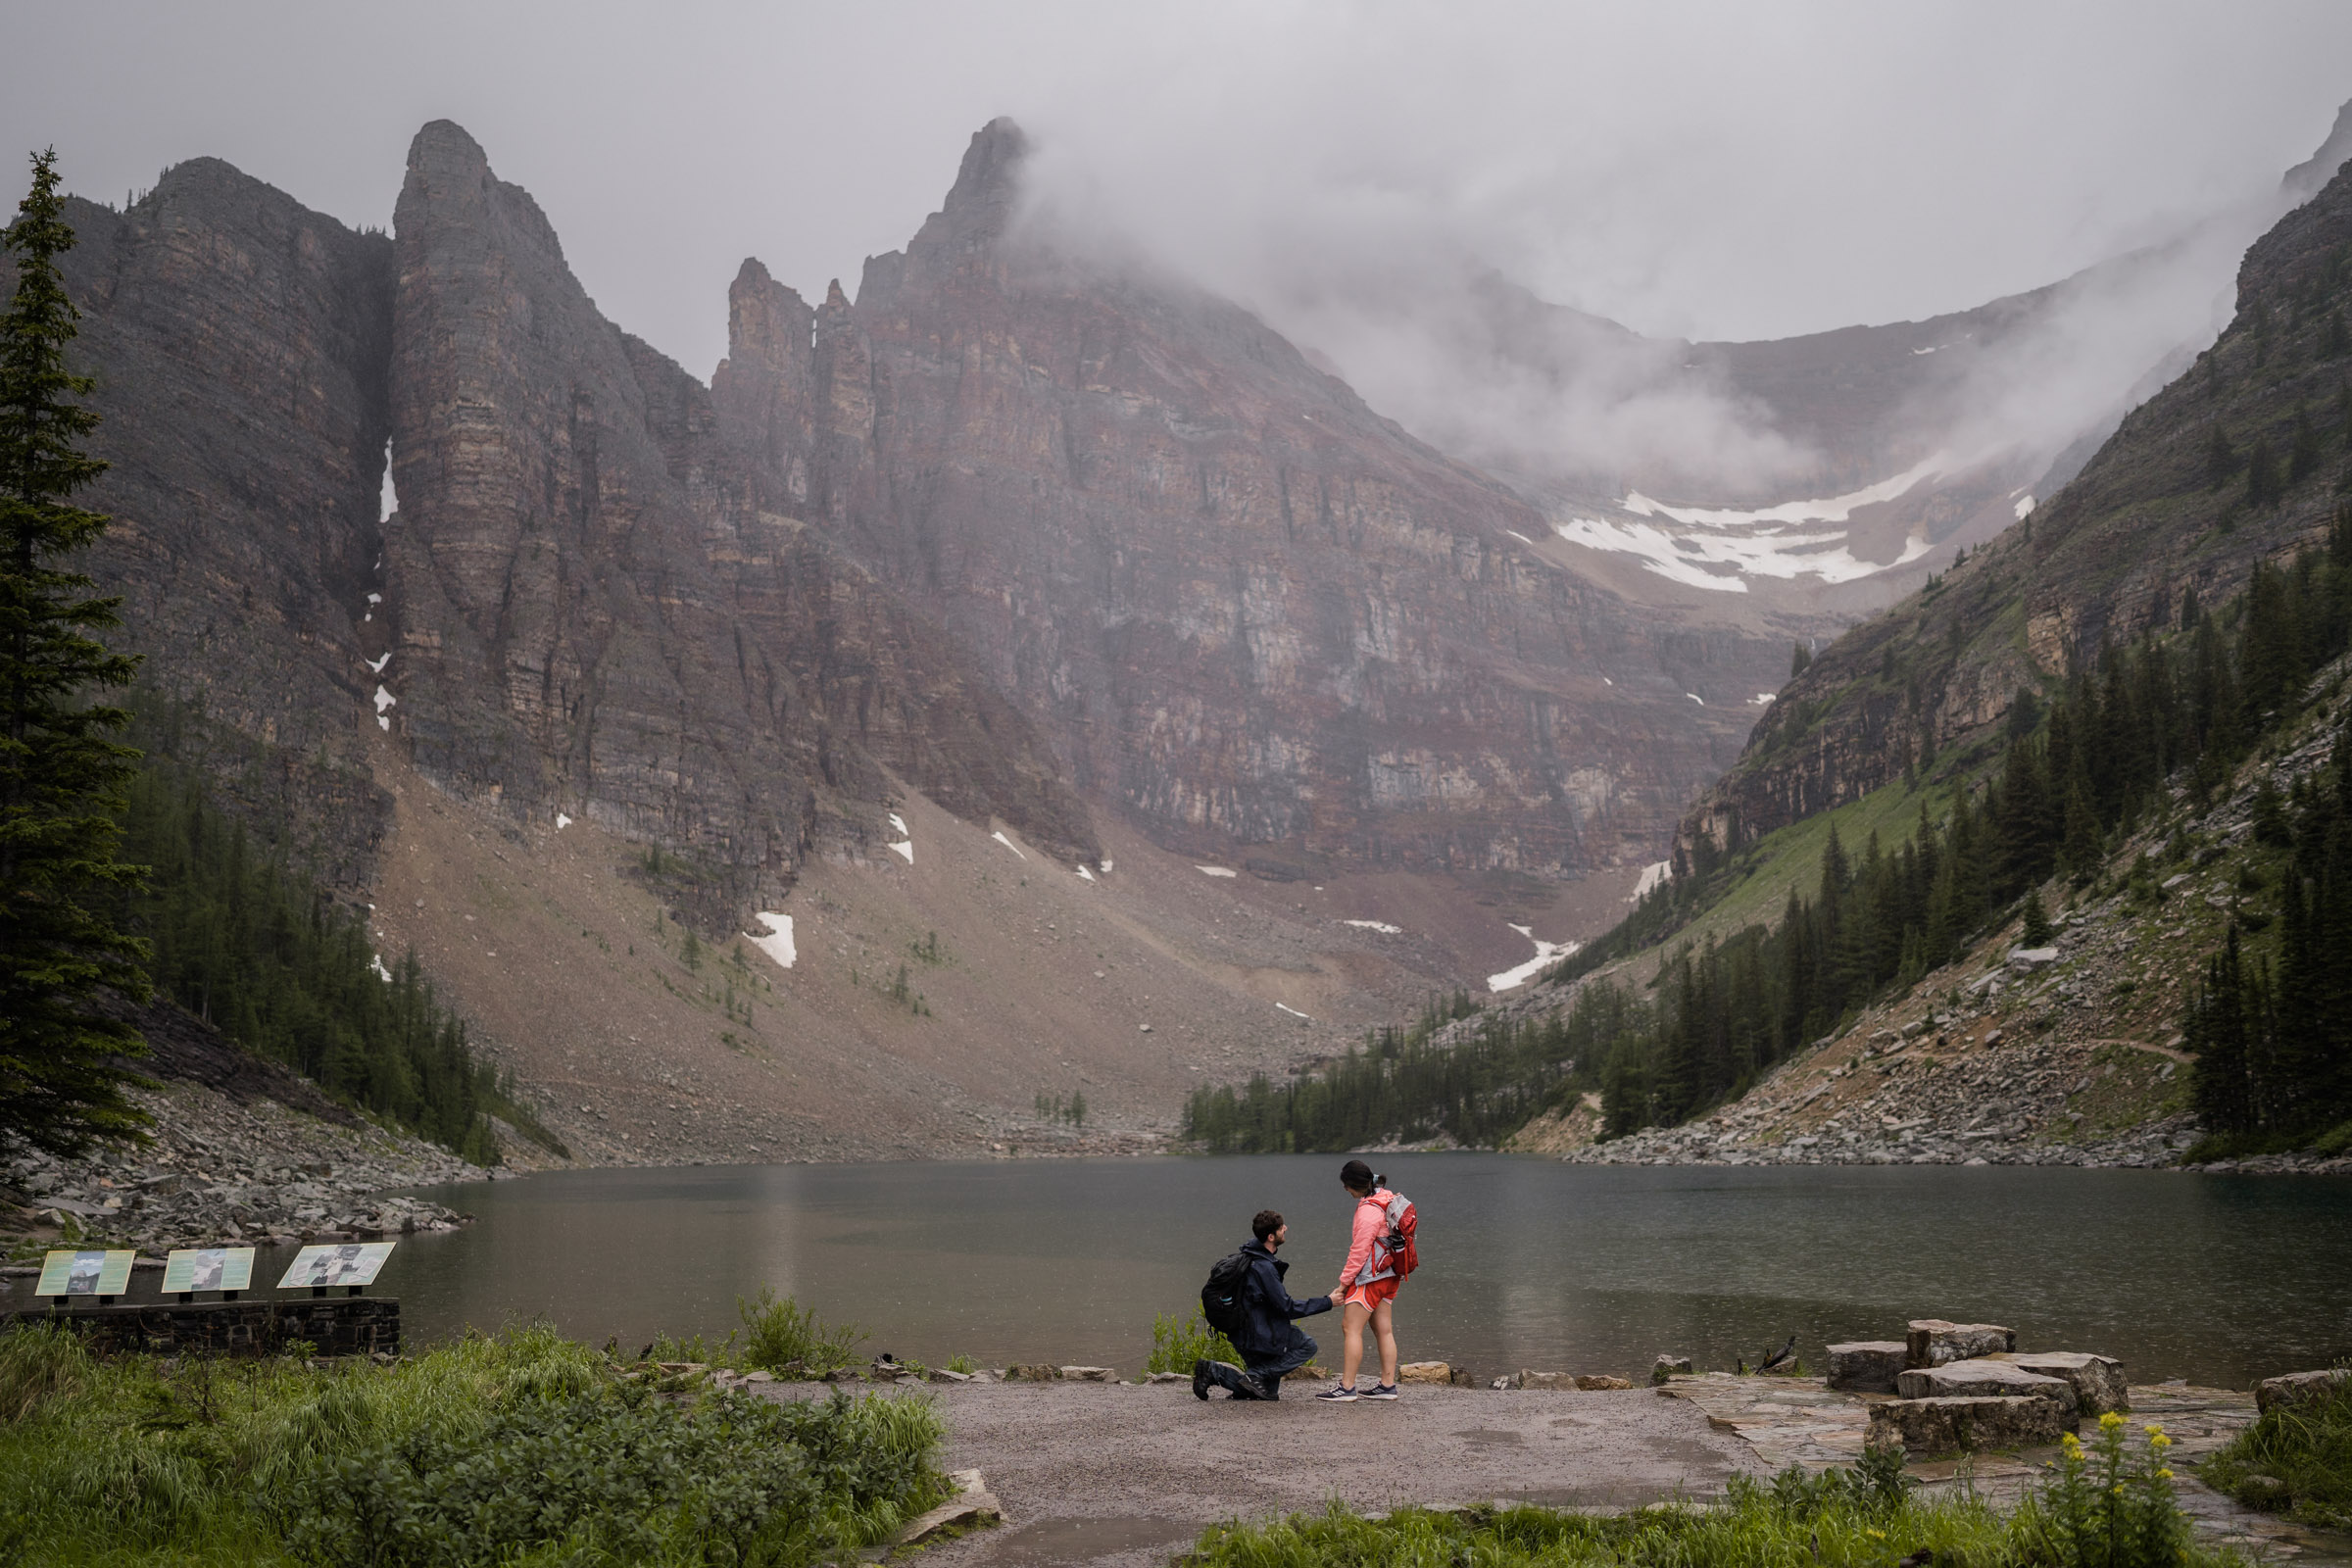 Man kneels down infront of girlfriend wearing pink jacket infront of Lake Agnes to propose in Banff National Park